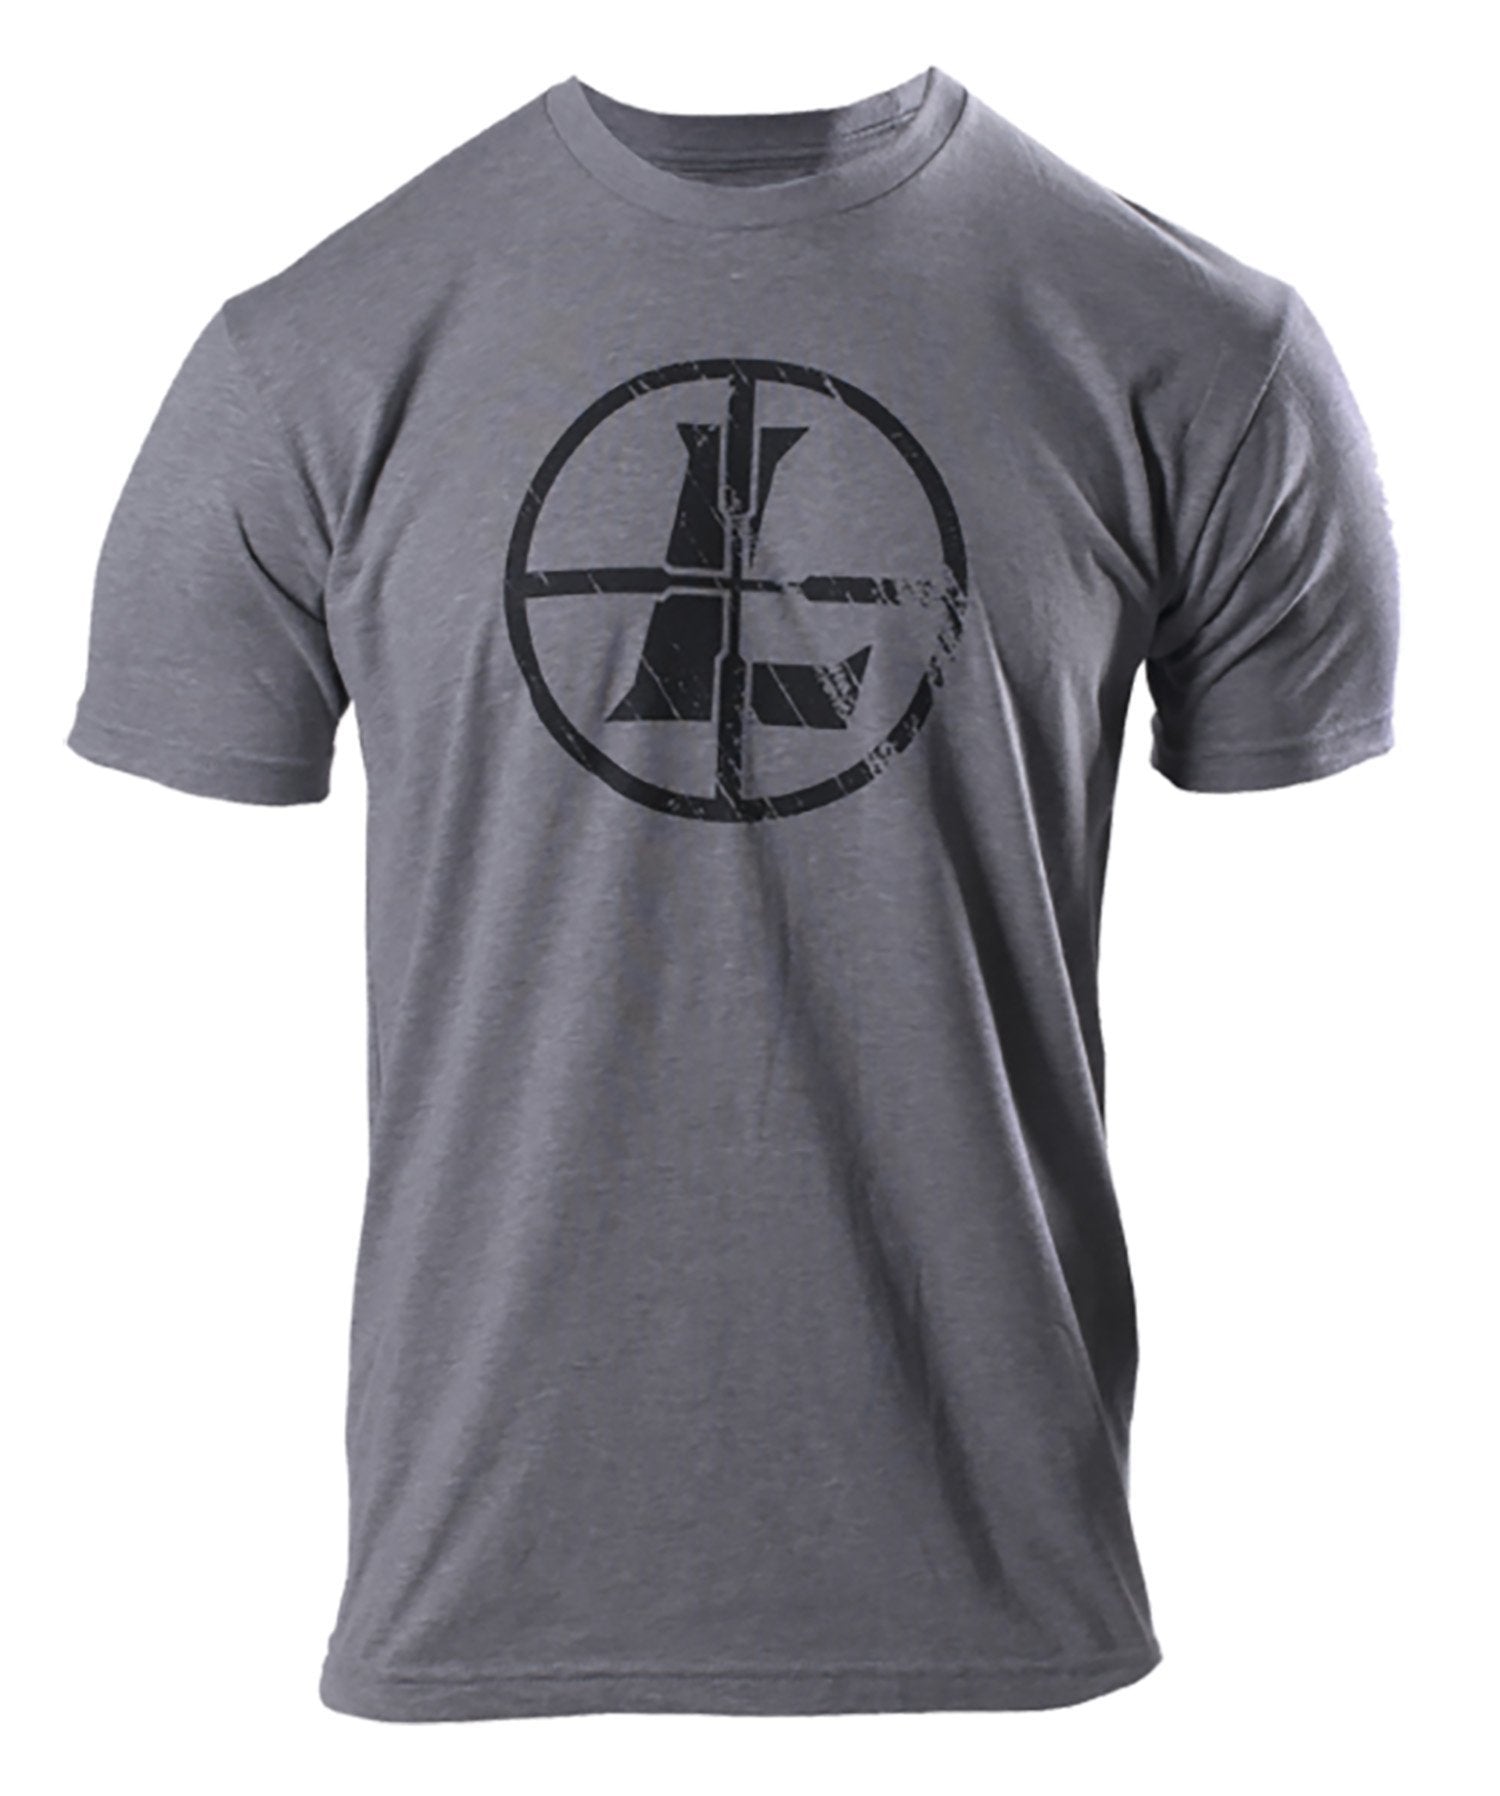 Leupold Distressed Reticle T-Shirt Graphite Heather XL Short Sleeve - Pacific Flyway Supplies